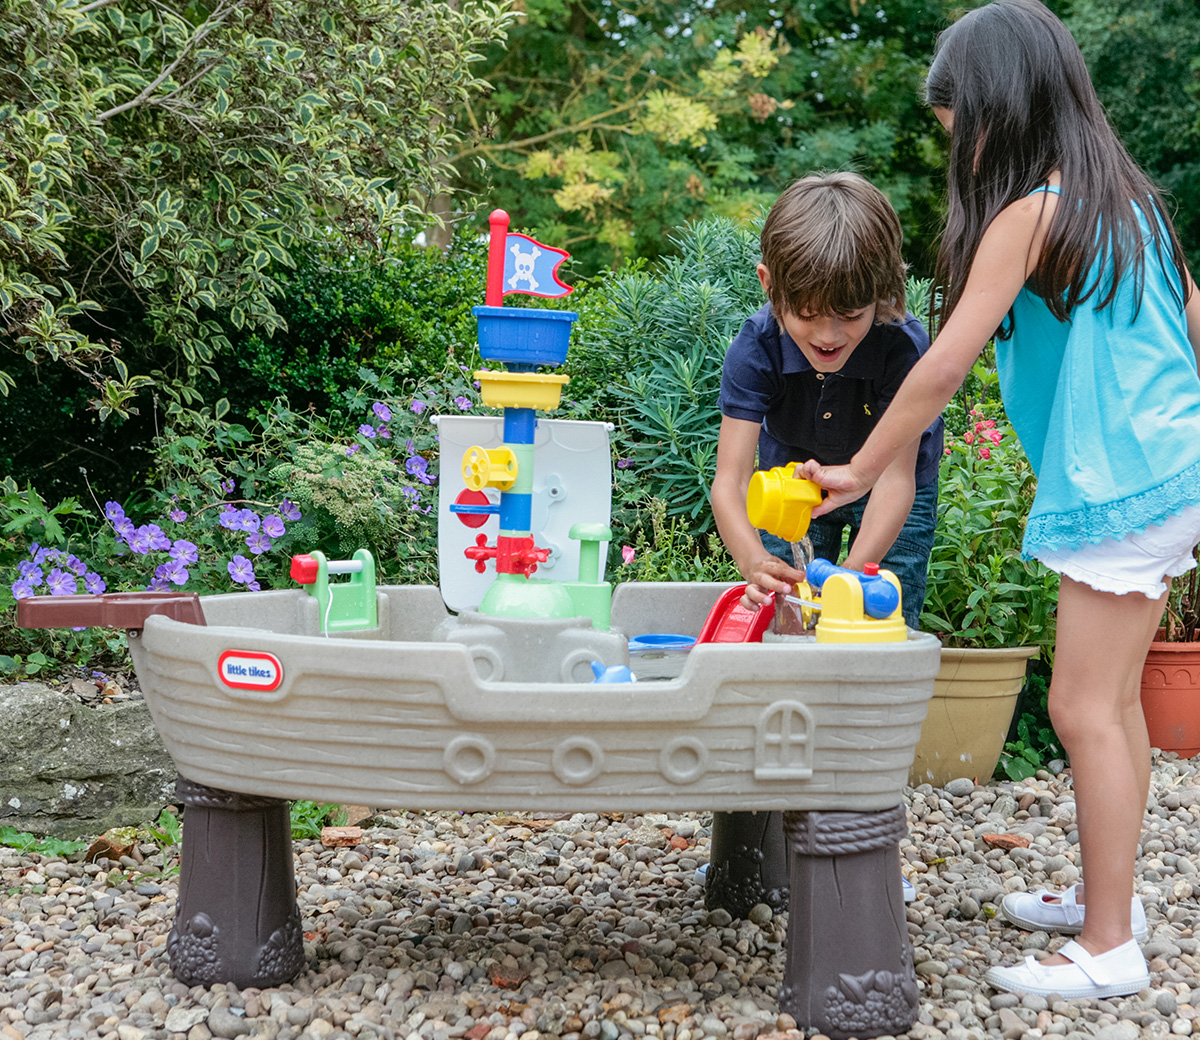 little tikes pirate water table instructions